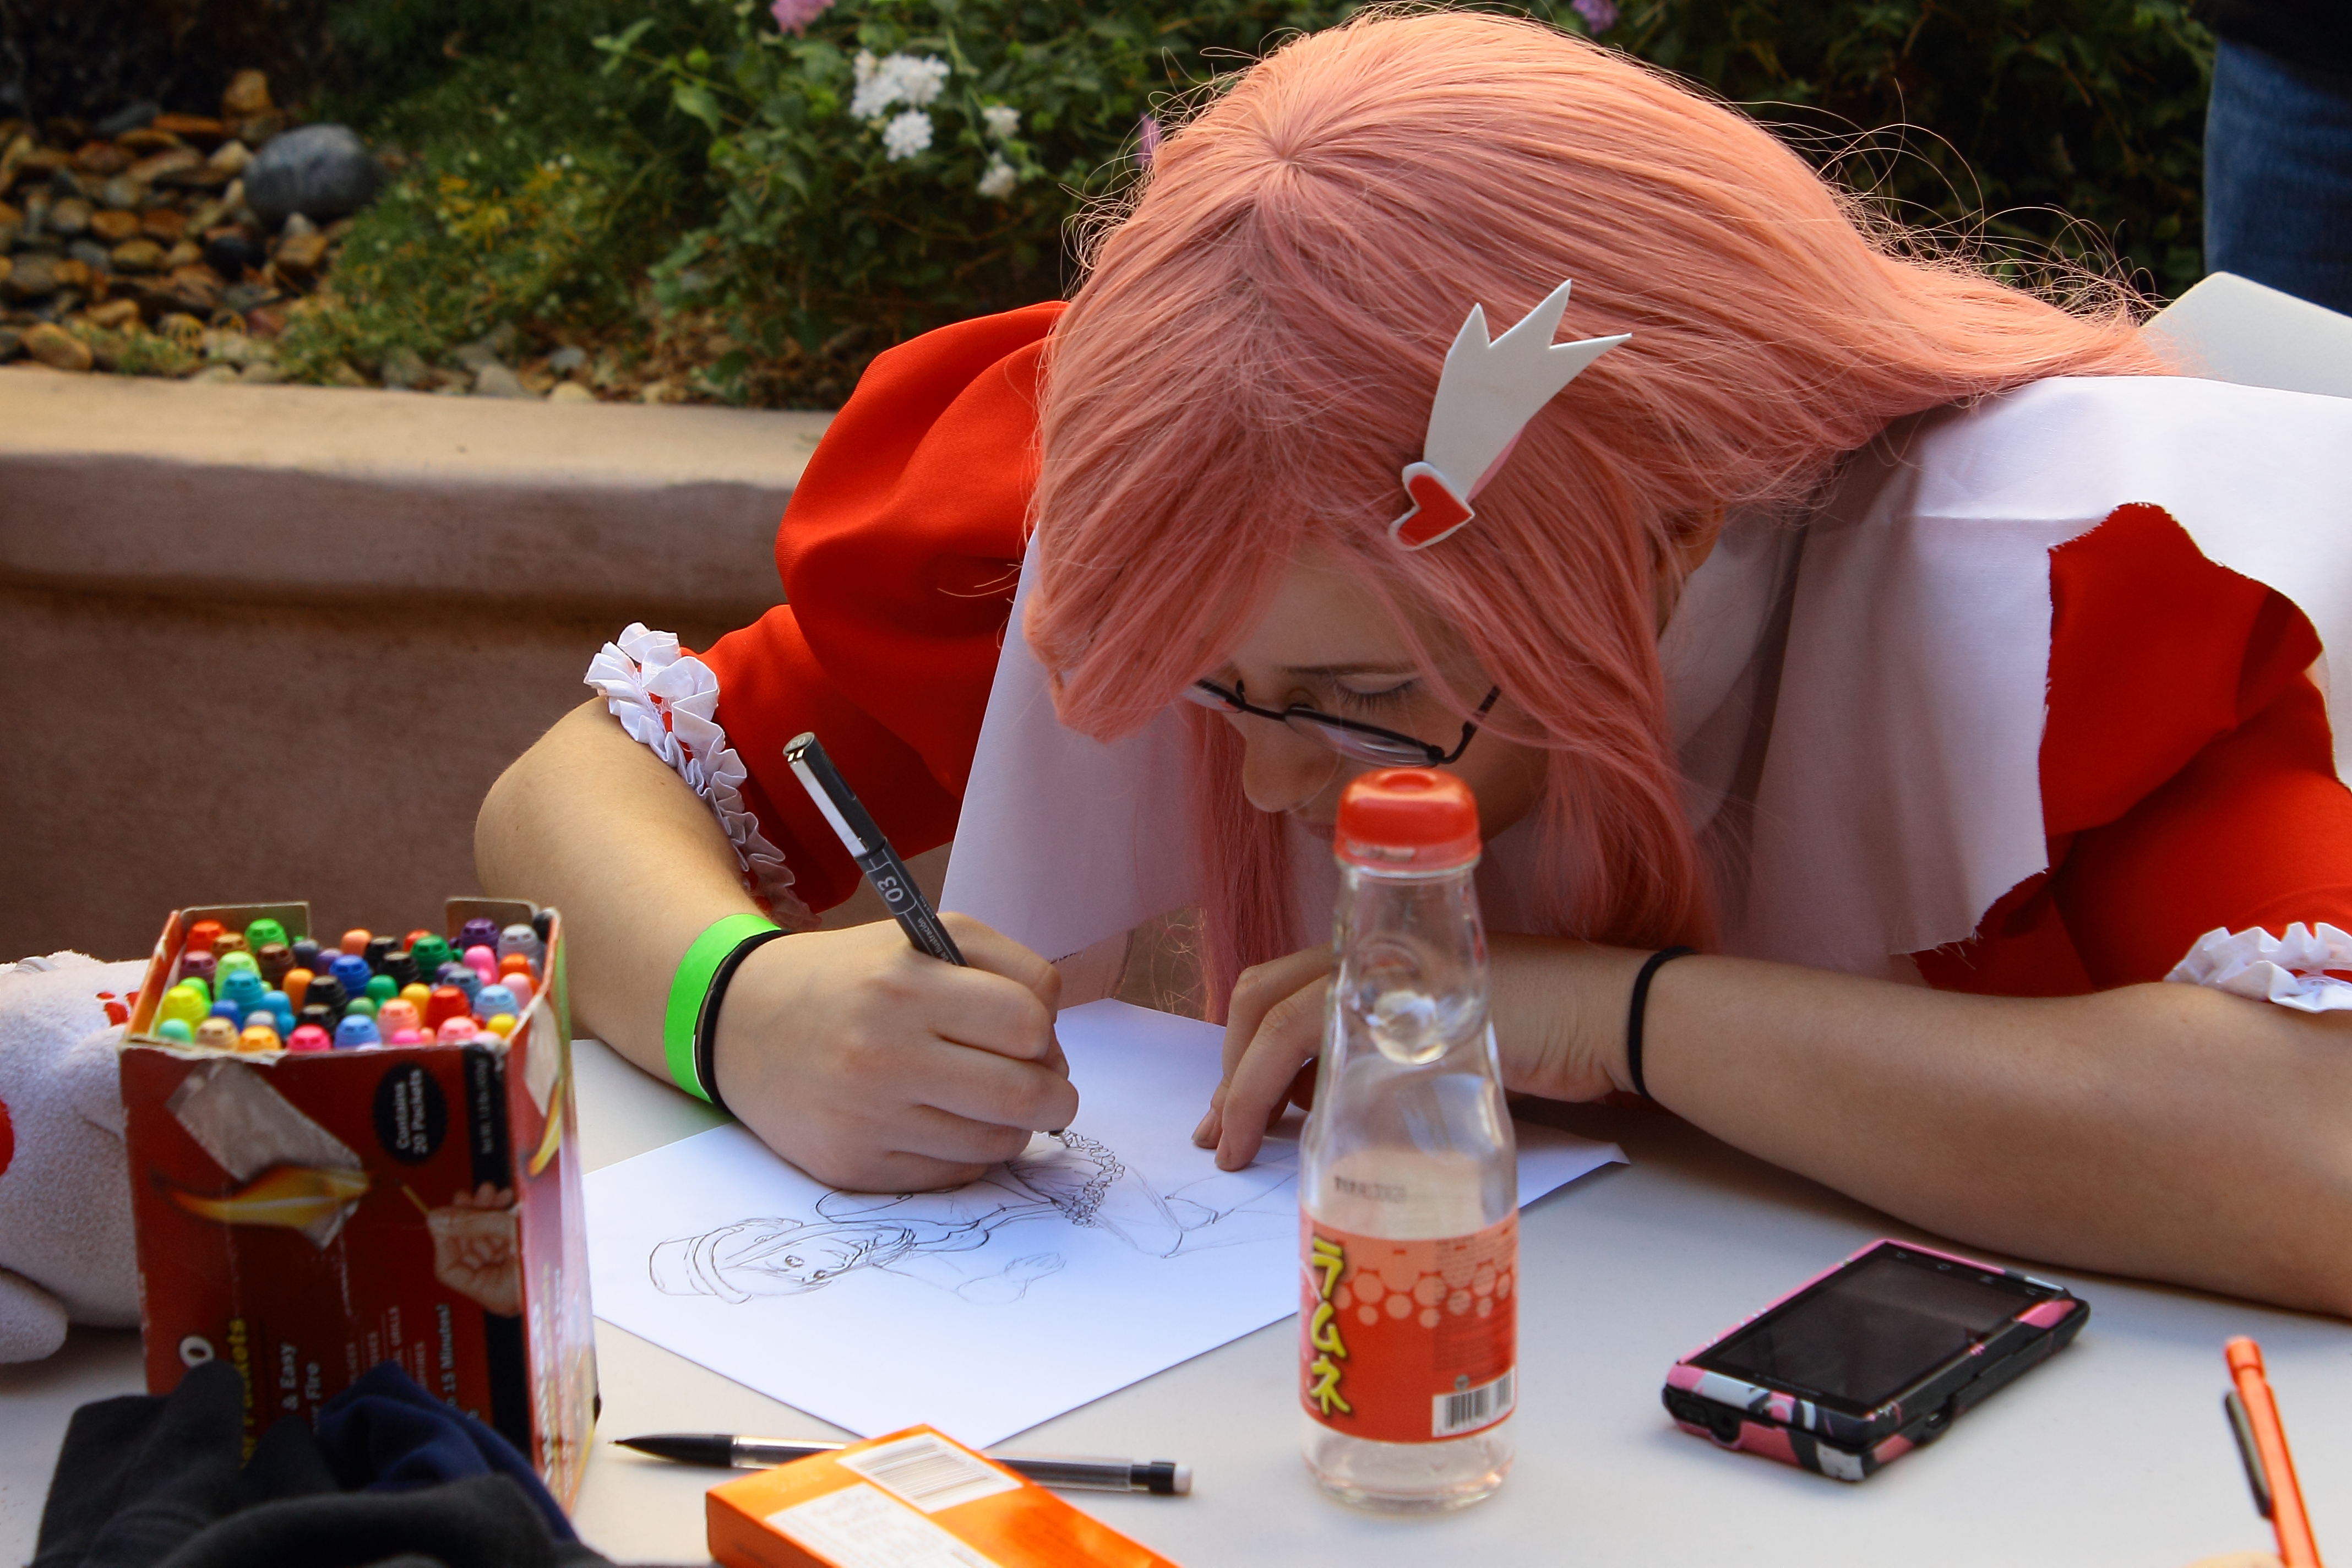 Danielle McCullah, dressed as Himeji, during the Duleing Pencils Contest | Photo by Alexis Grissom-Pack